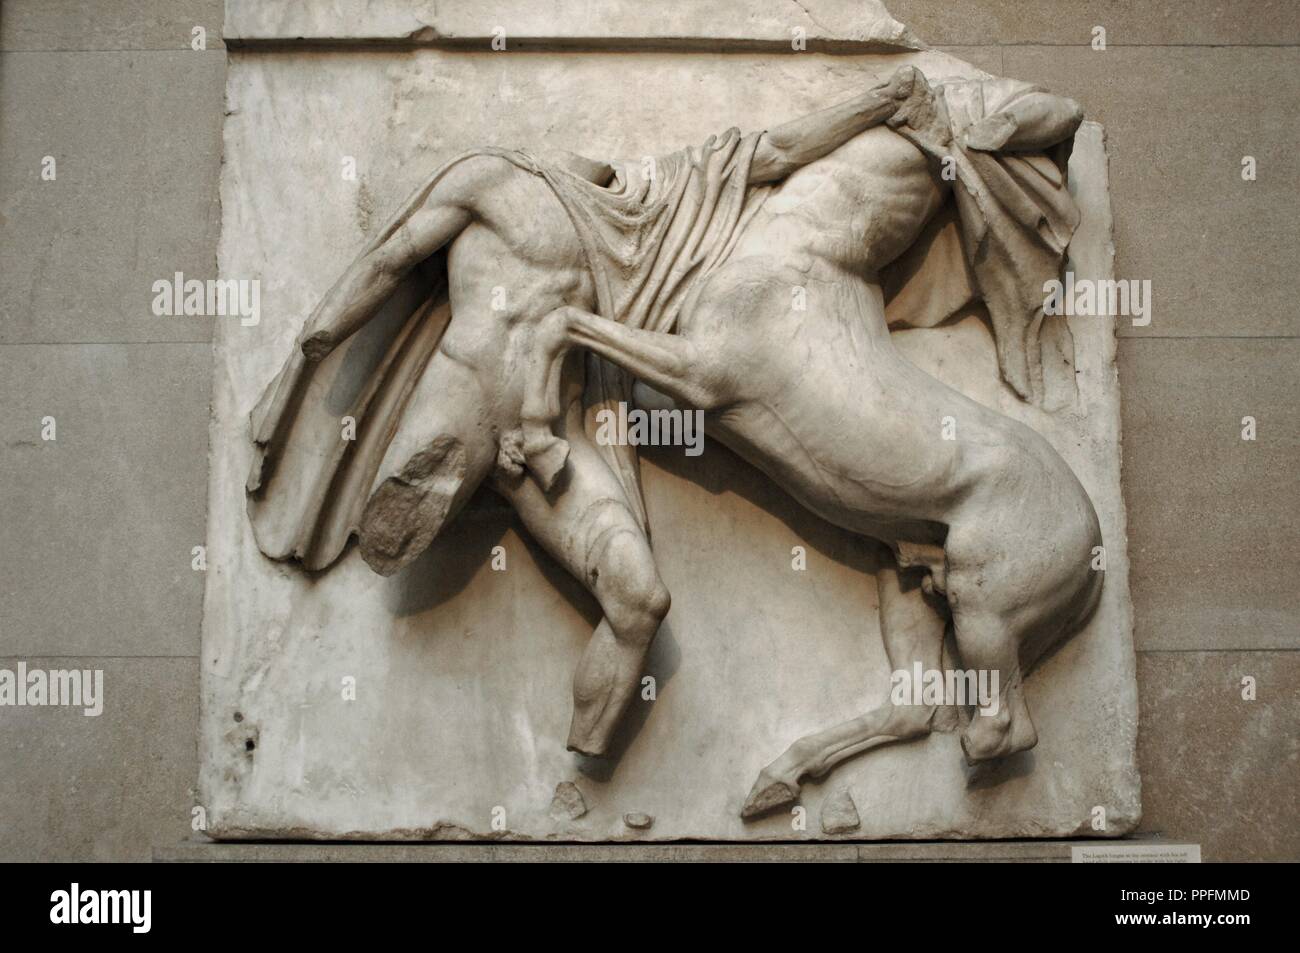 Metope VII from the Parthenon marbles depicting part of the battle between the Centaurs and the Lapiths. 5th century BC. Athens. British Museum. London. United Kingdom. Stock Photo